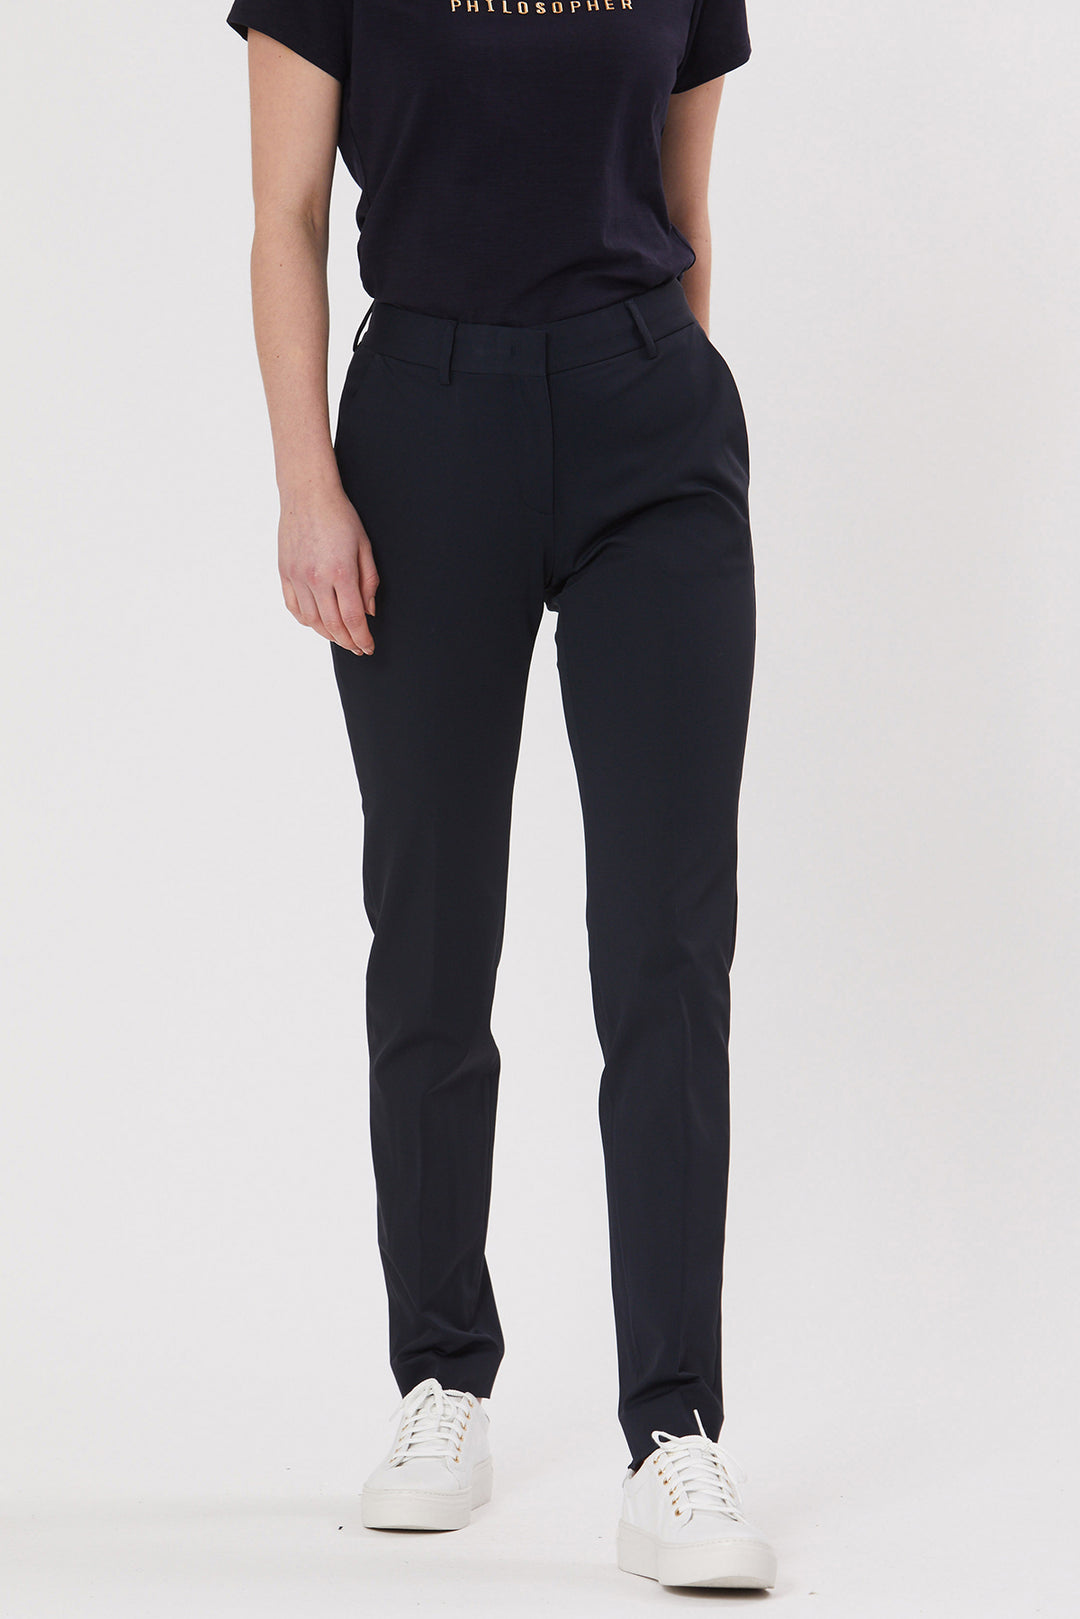 PBO Beck extra long pants TROUSERS 250 Midnight